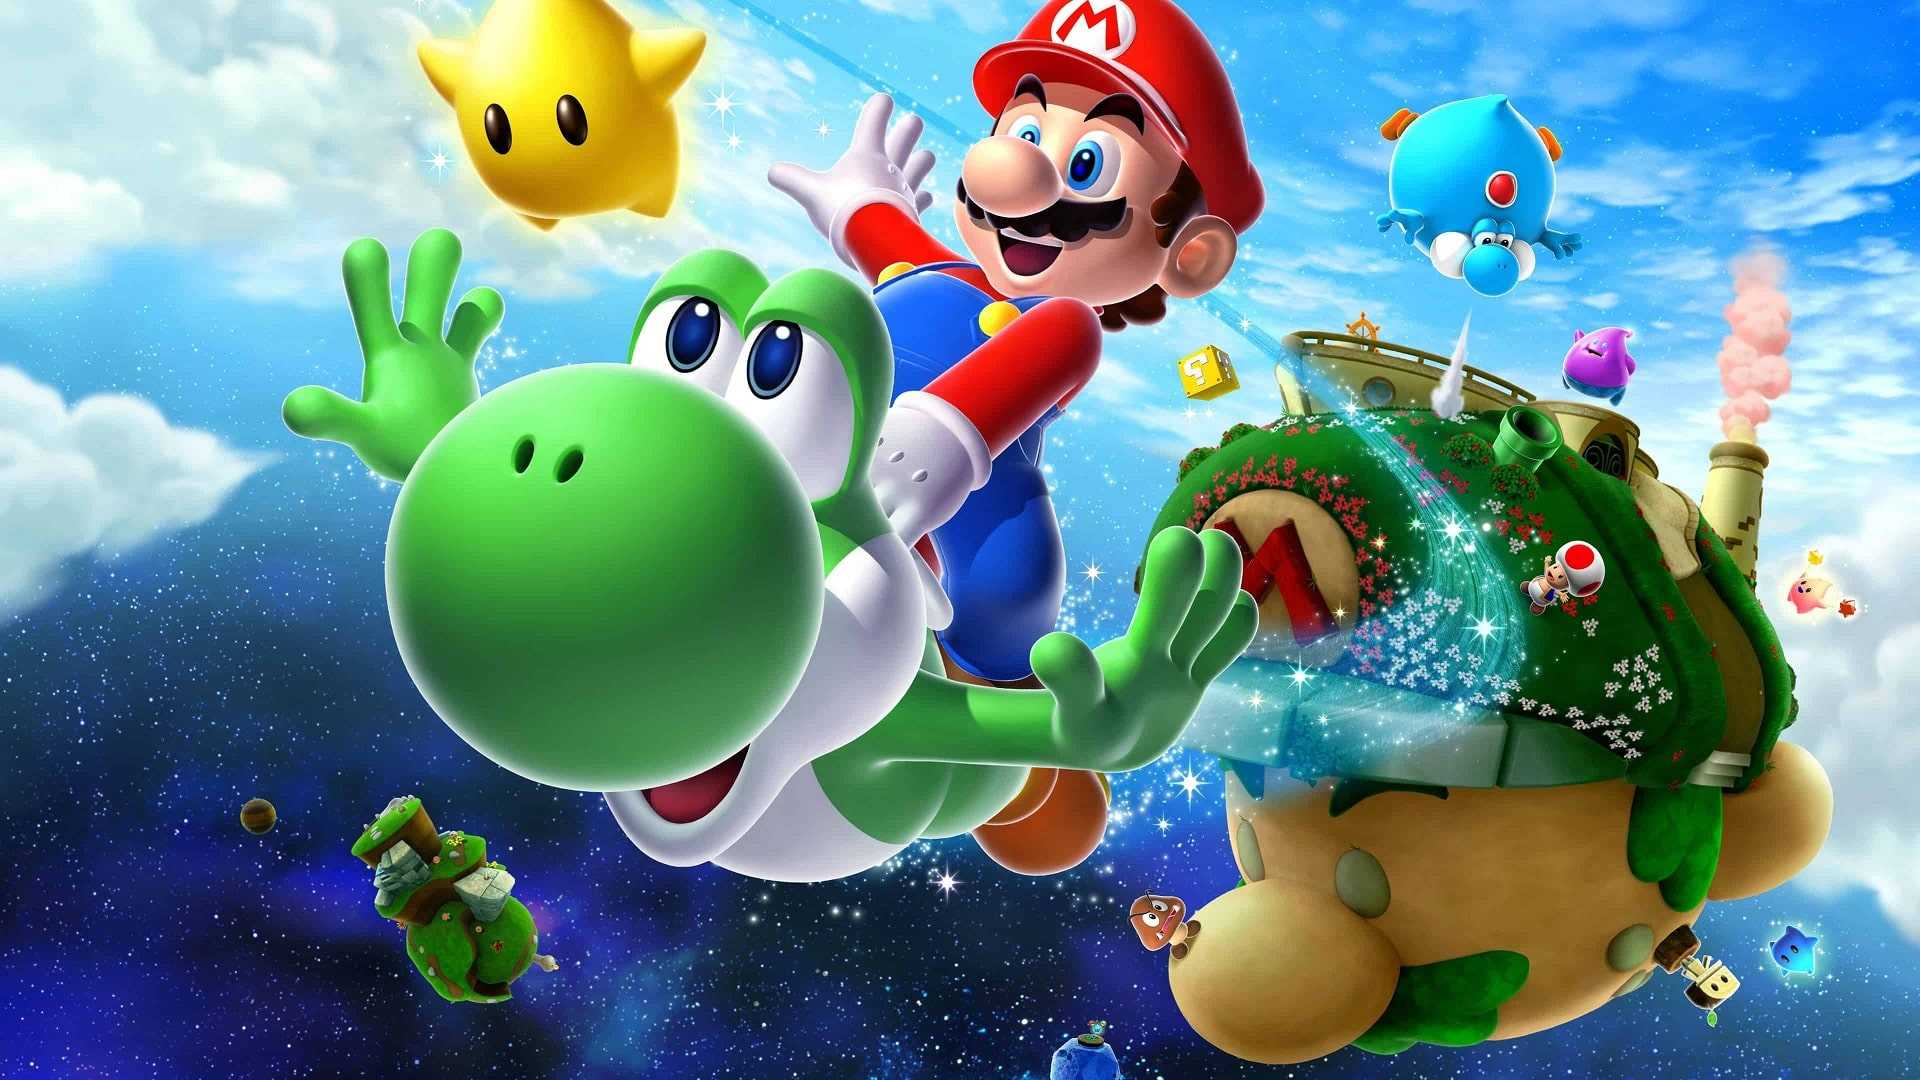 Cool Mario Wallpapers